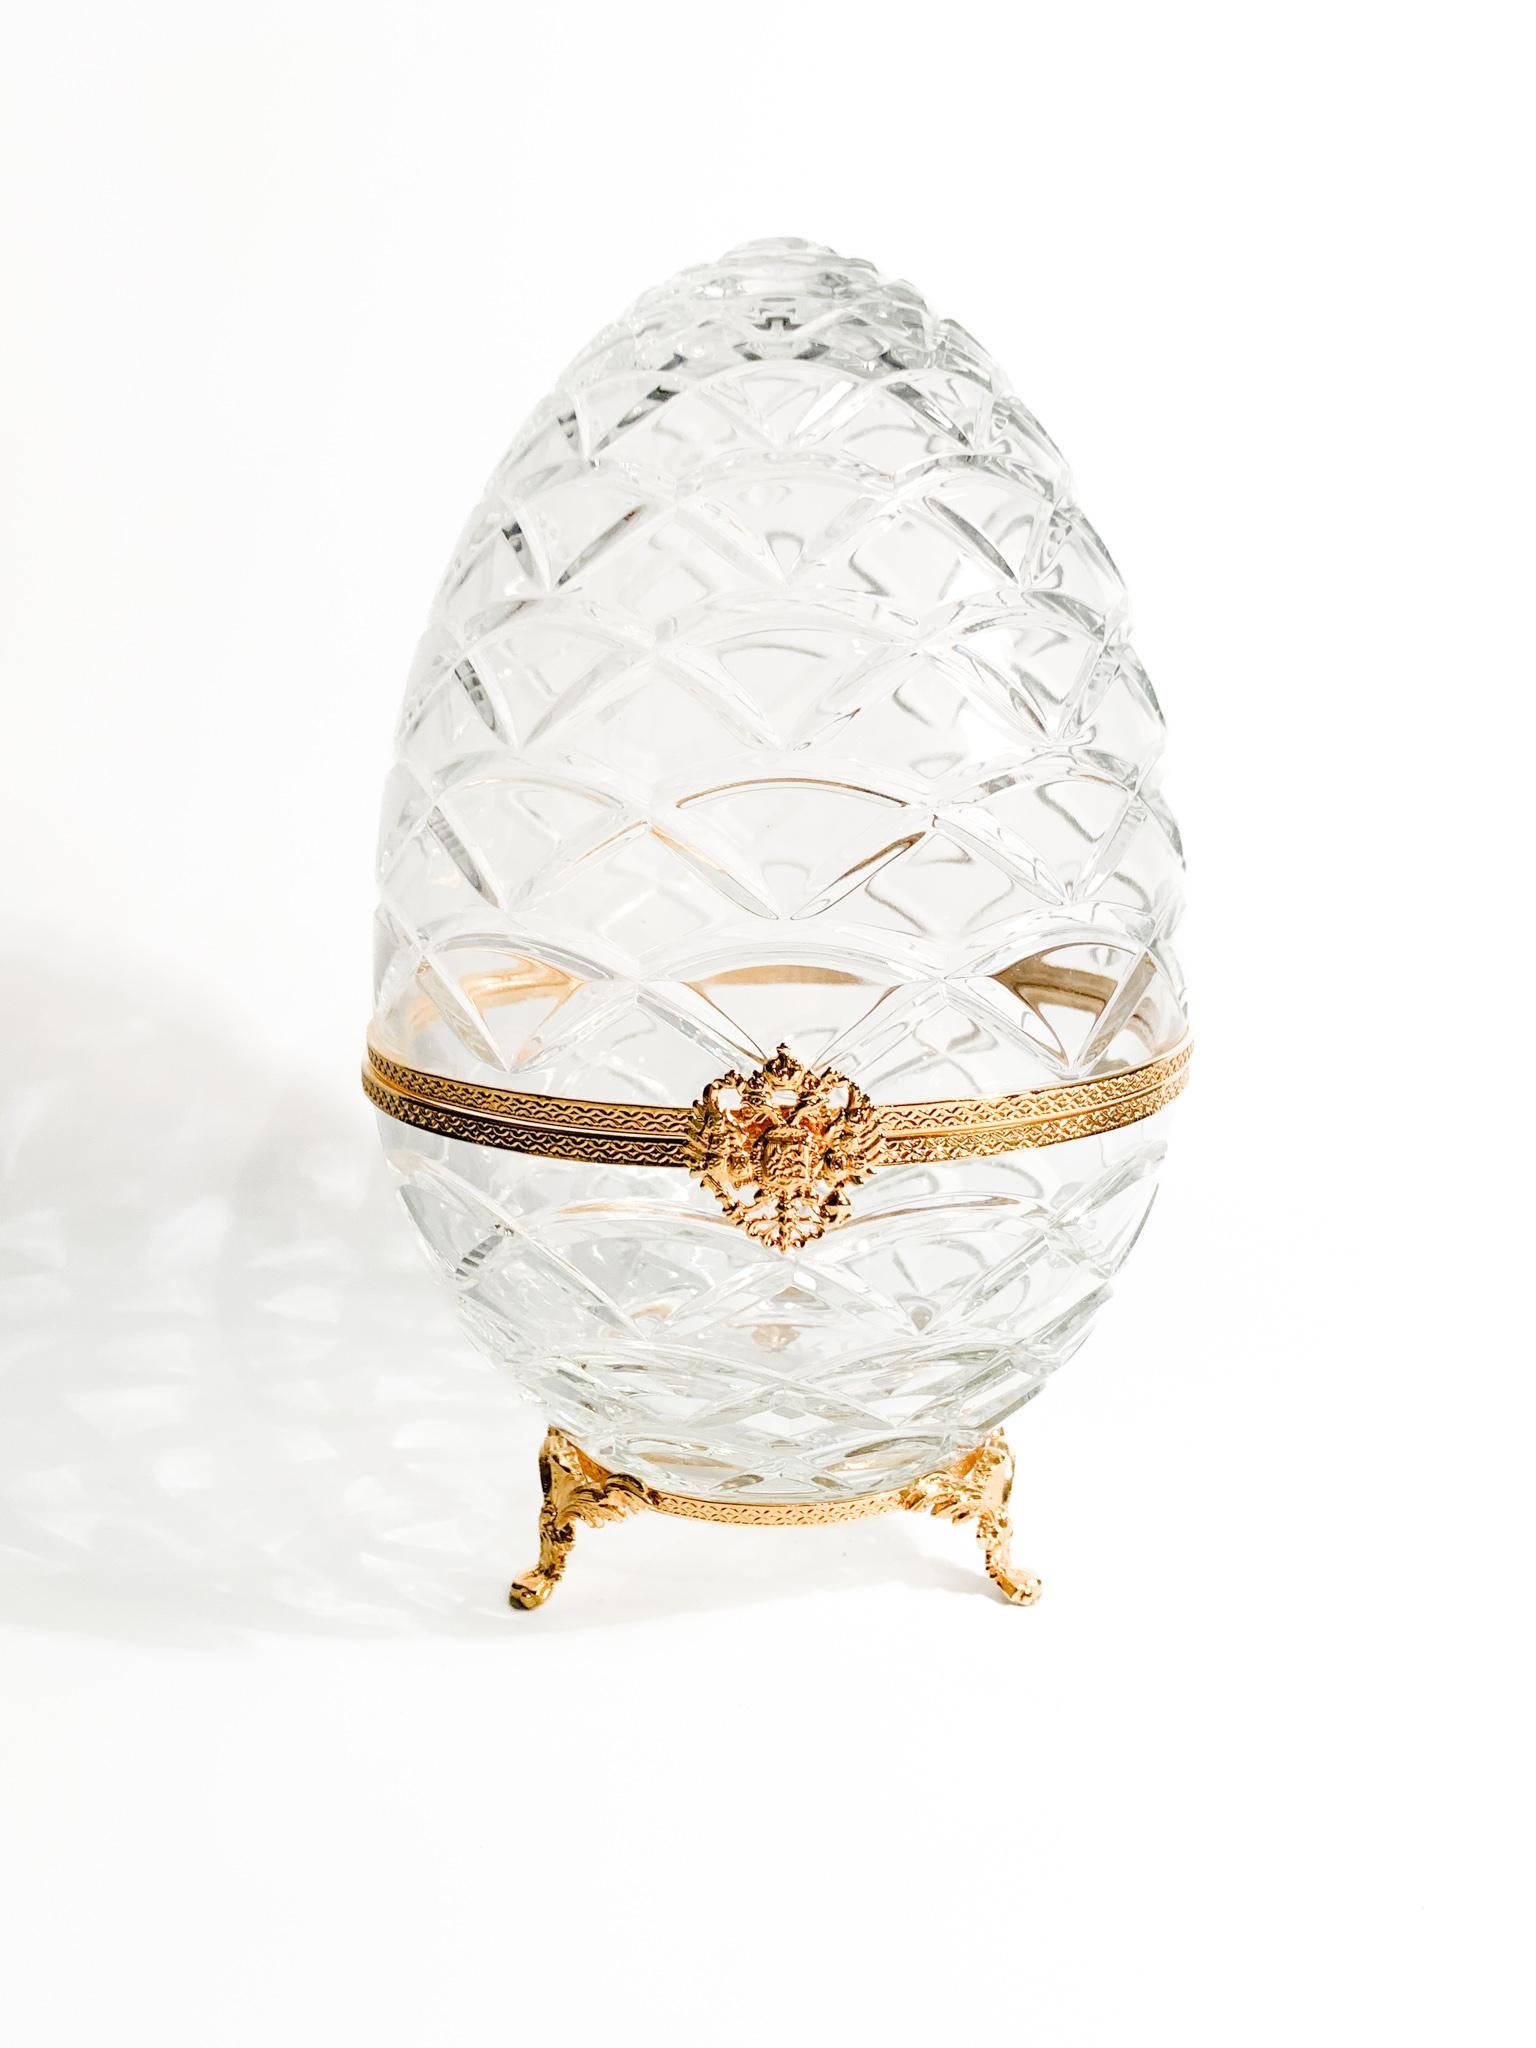 Mid-20th Century Imperial Vodka and Caviar Set in Fabergé Crystal For Sale